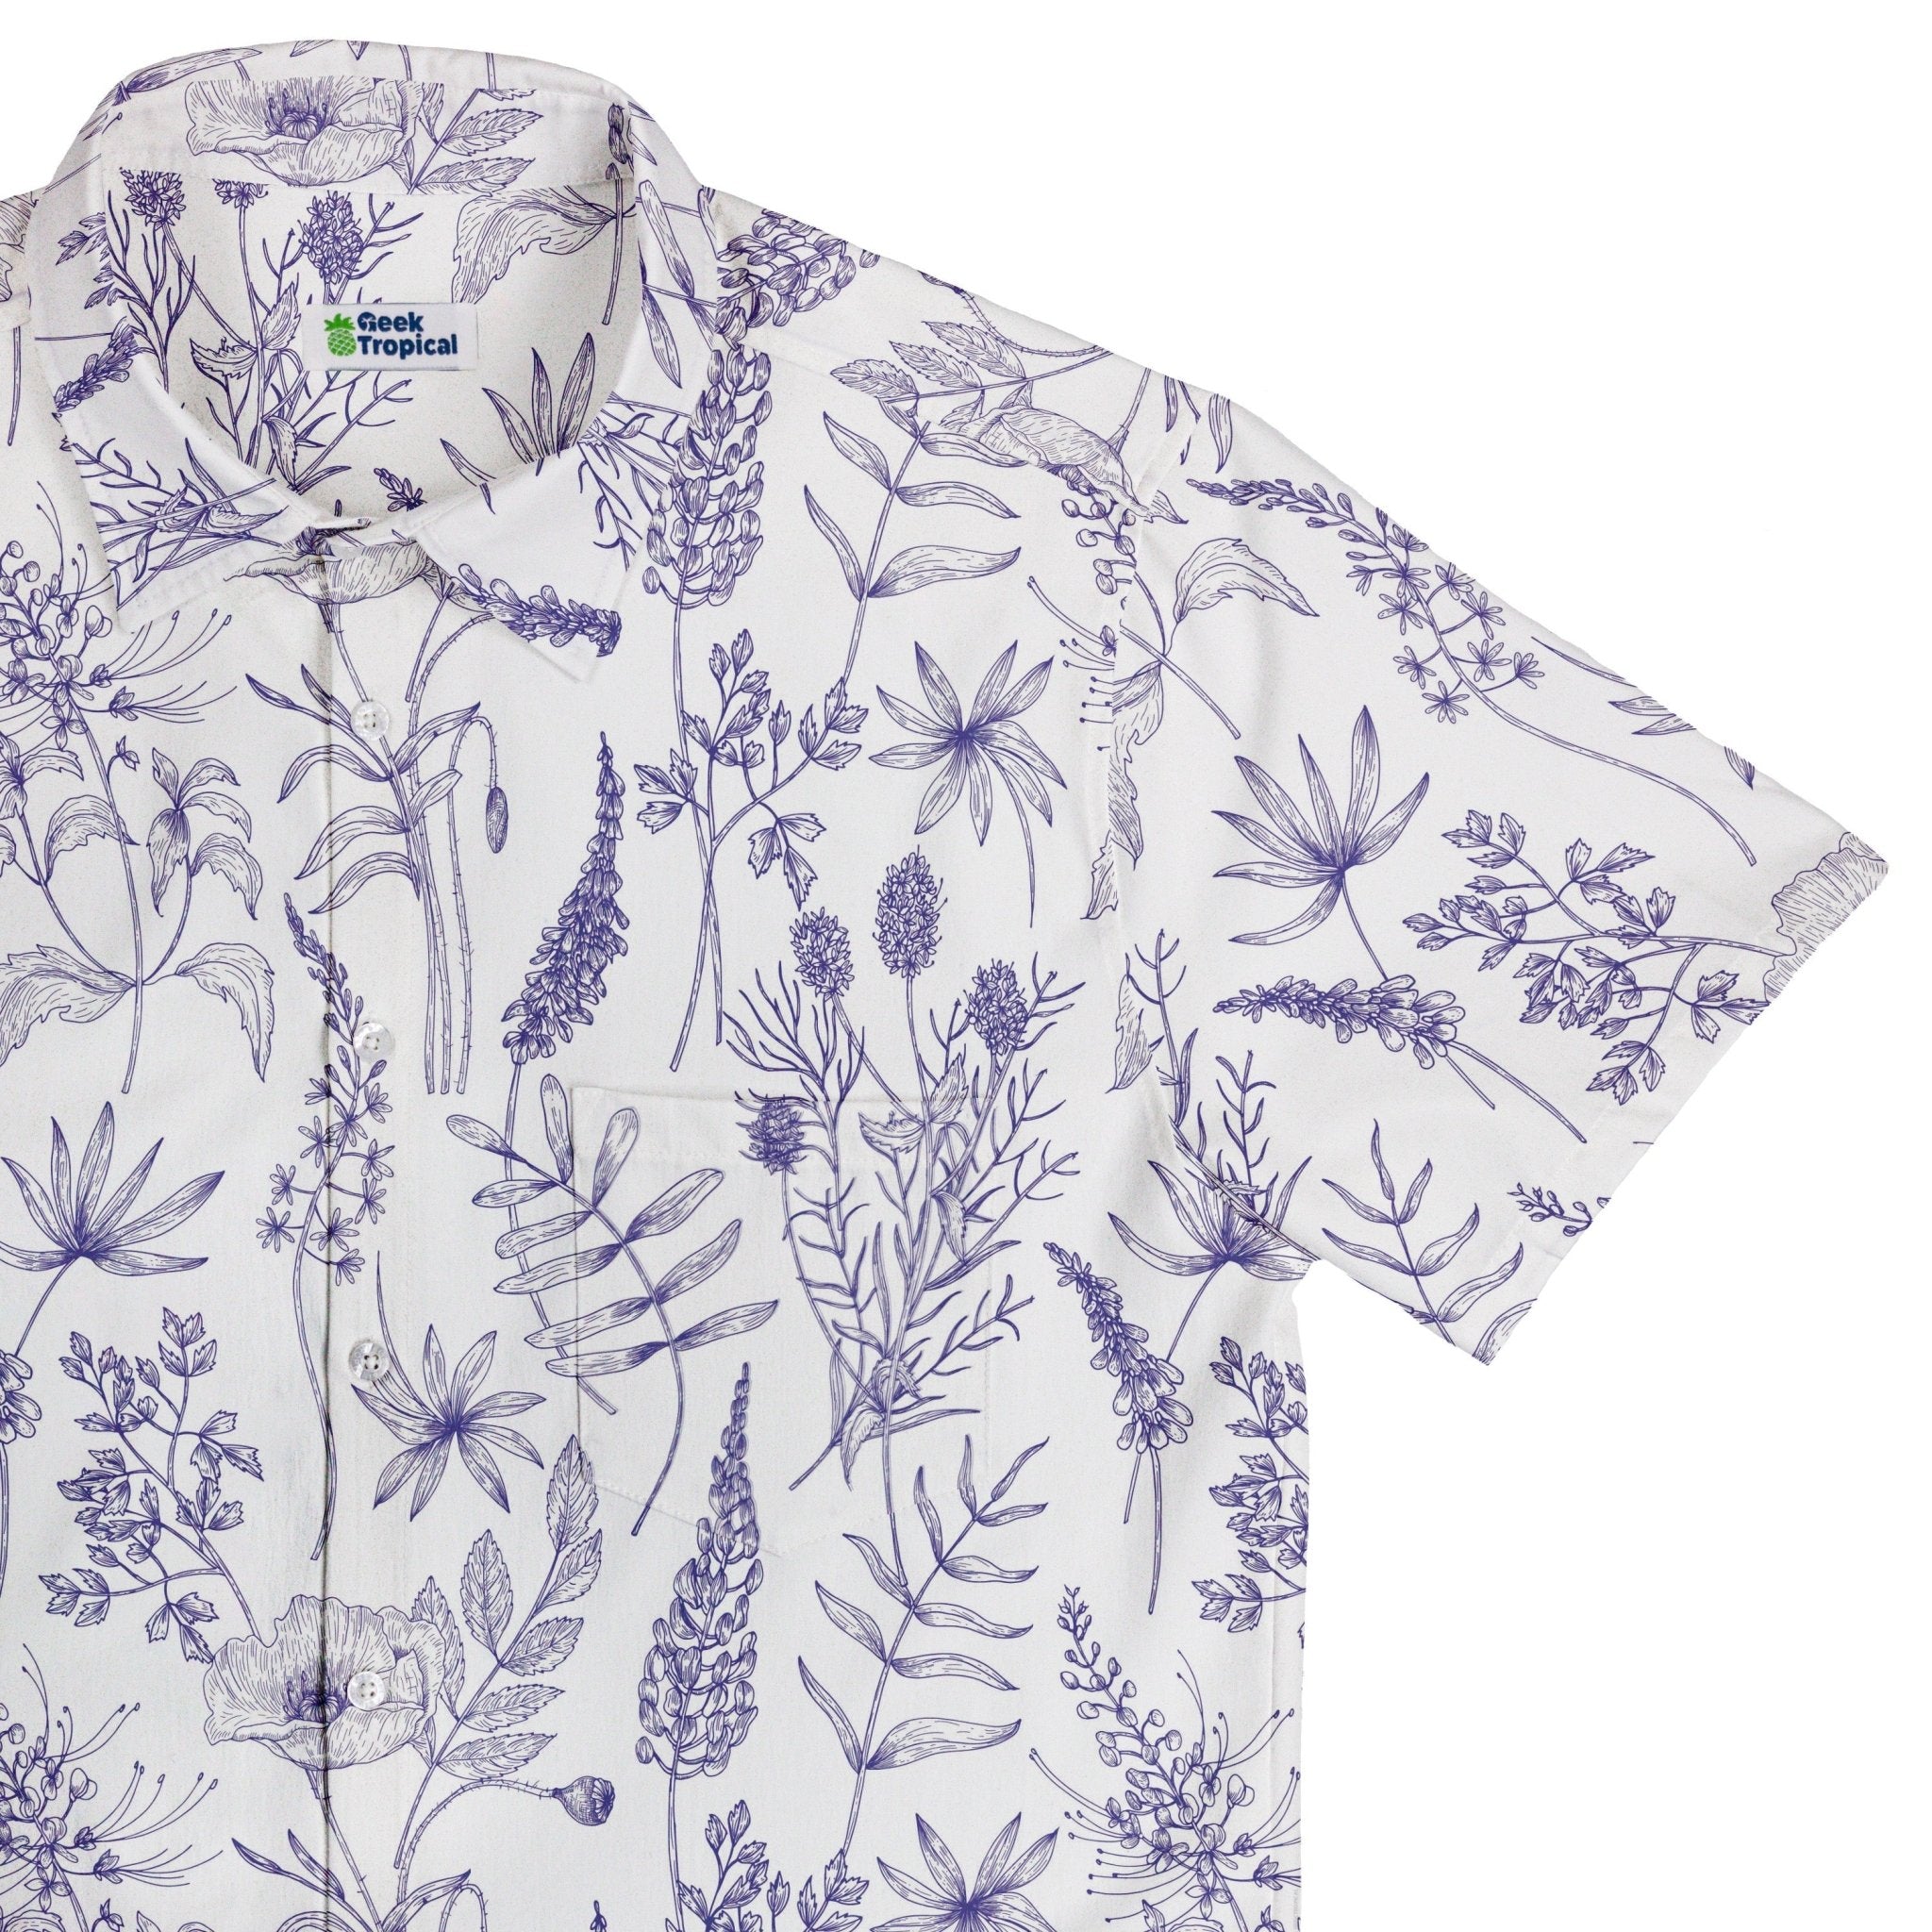 Simple Botany Flowers Herbs White Blue Button Up Shirt - adult sizing - Botany Print - Simple Patterns